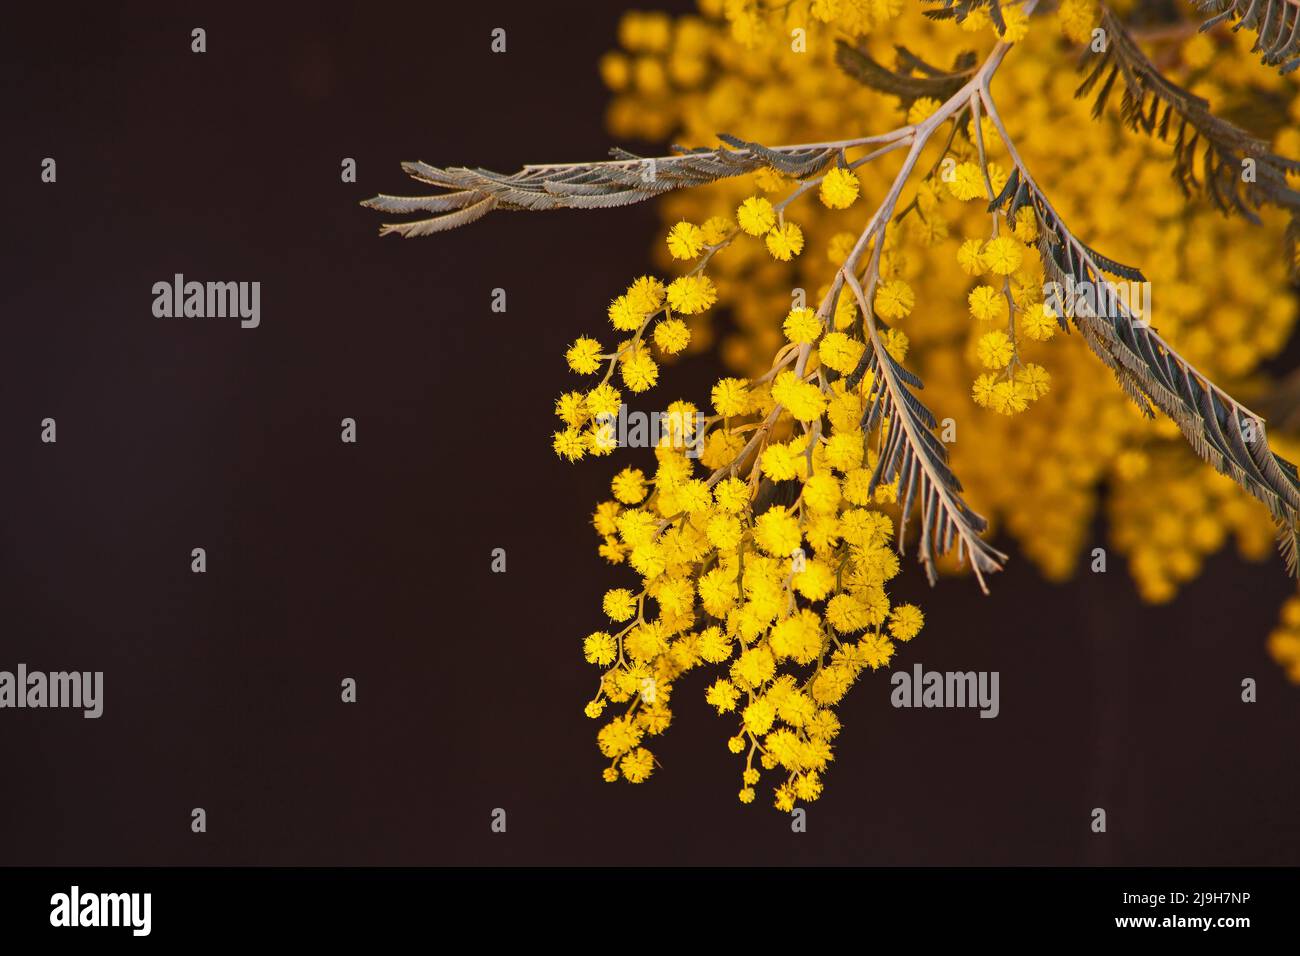 Macro image of the bright yellow flowers of the Black Wattle (Acasia mearnsii) Stock Photo